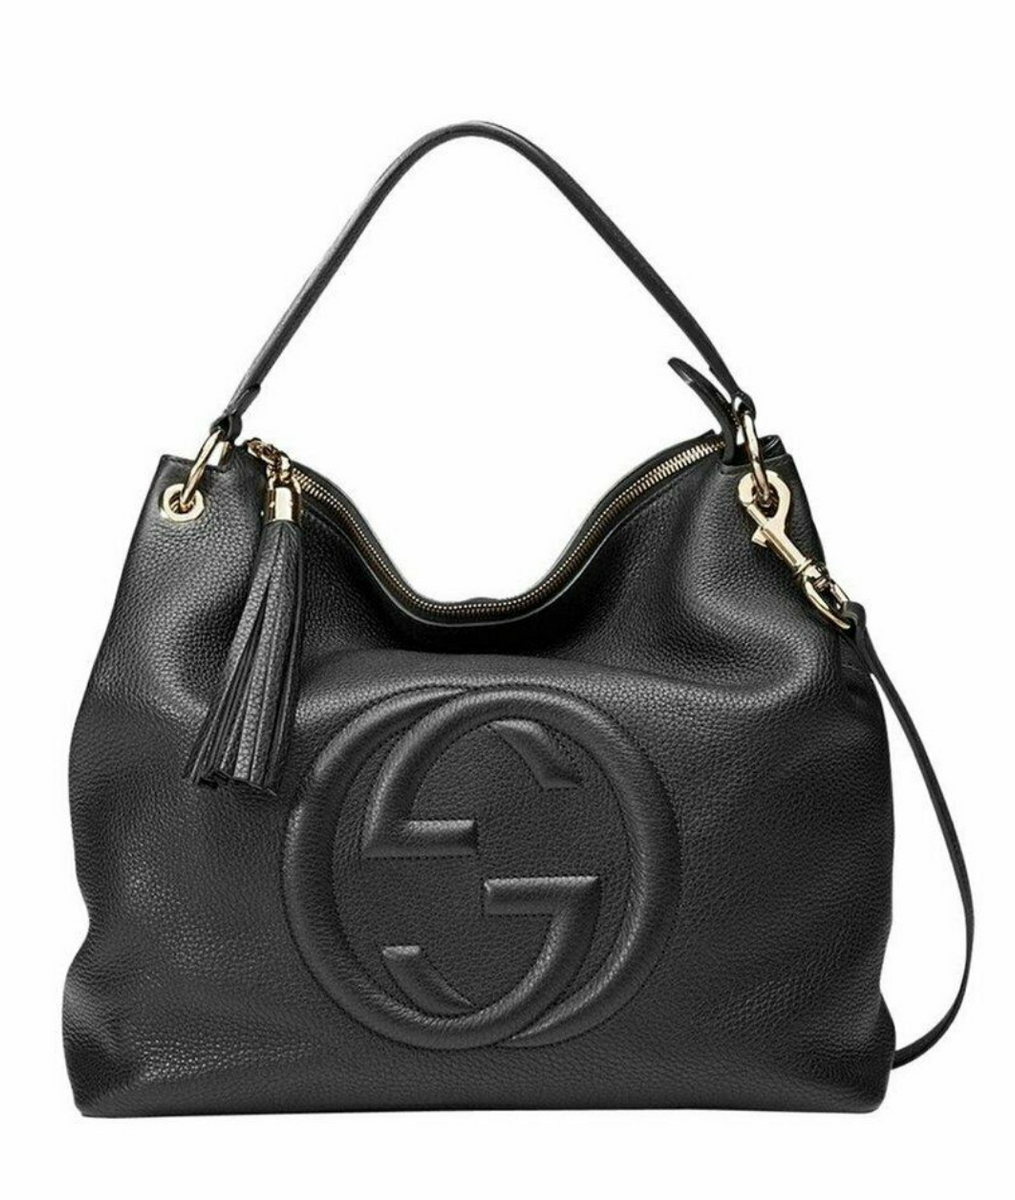 Gucci - Authenticated Bag - Leather Black for Men, Never Worn, with Tag